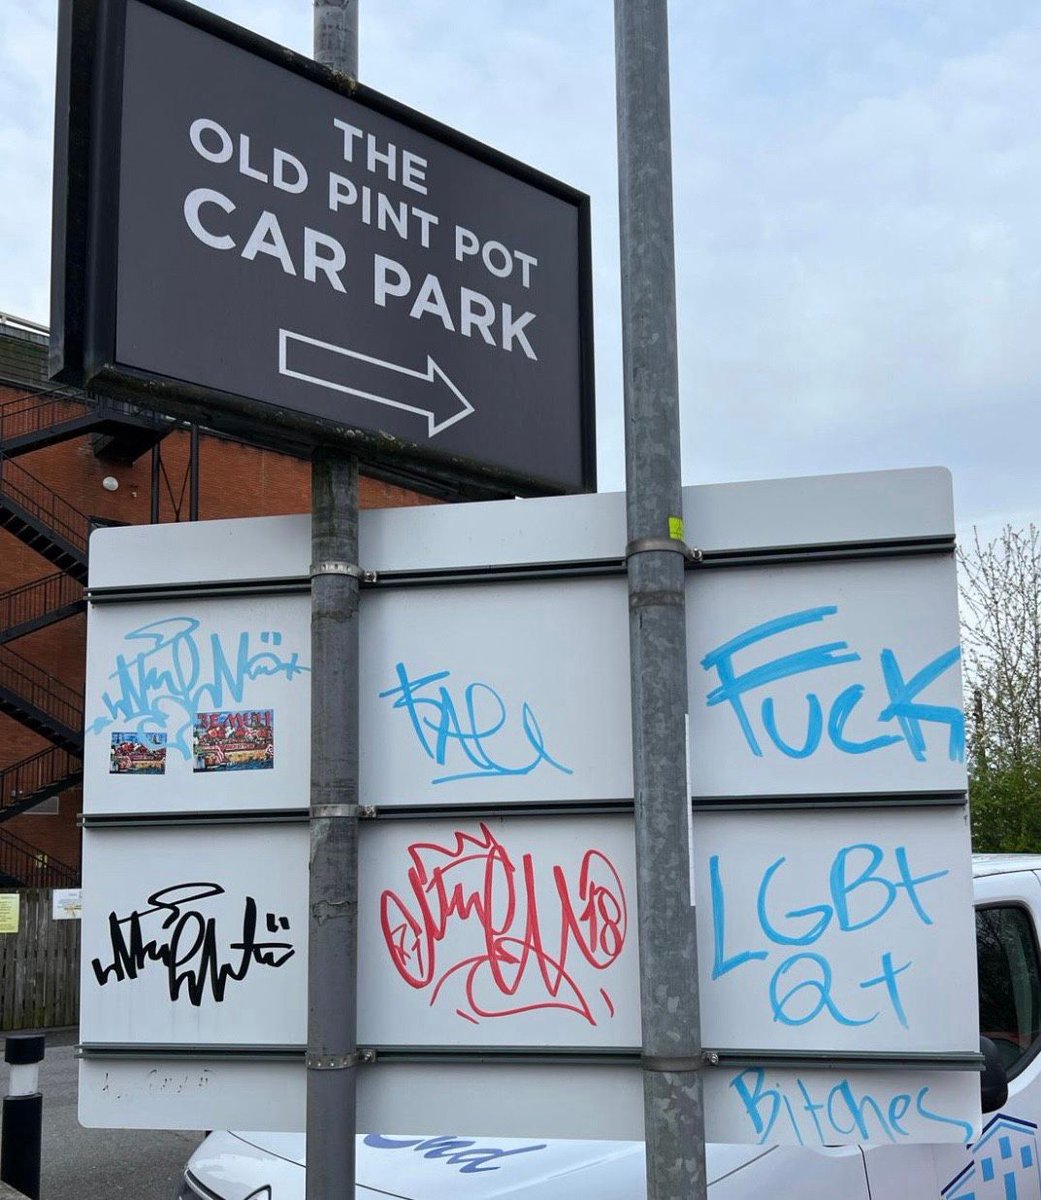 Salford Pride Trustees have noticed homophobic graffiti appearing in and around Chapel St and have reported it to Salford City Council. If you see racist, homophobic or offensive graffiti, please report it to the council. buff.ly/43Q1dj3